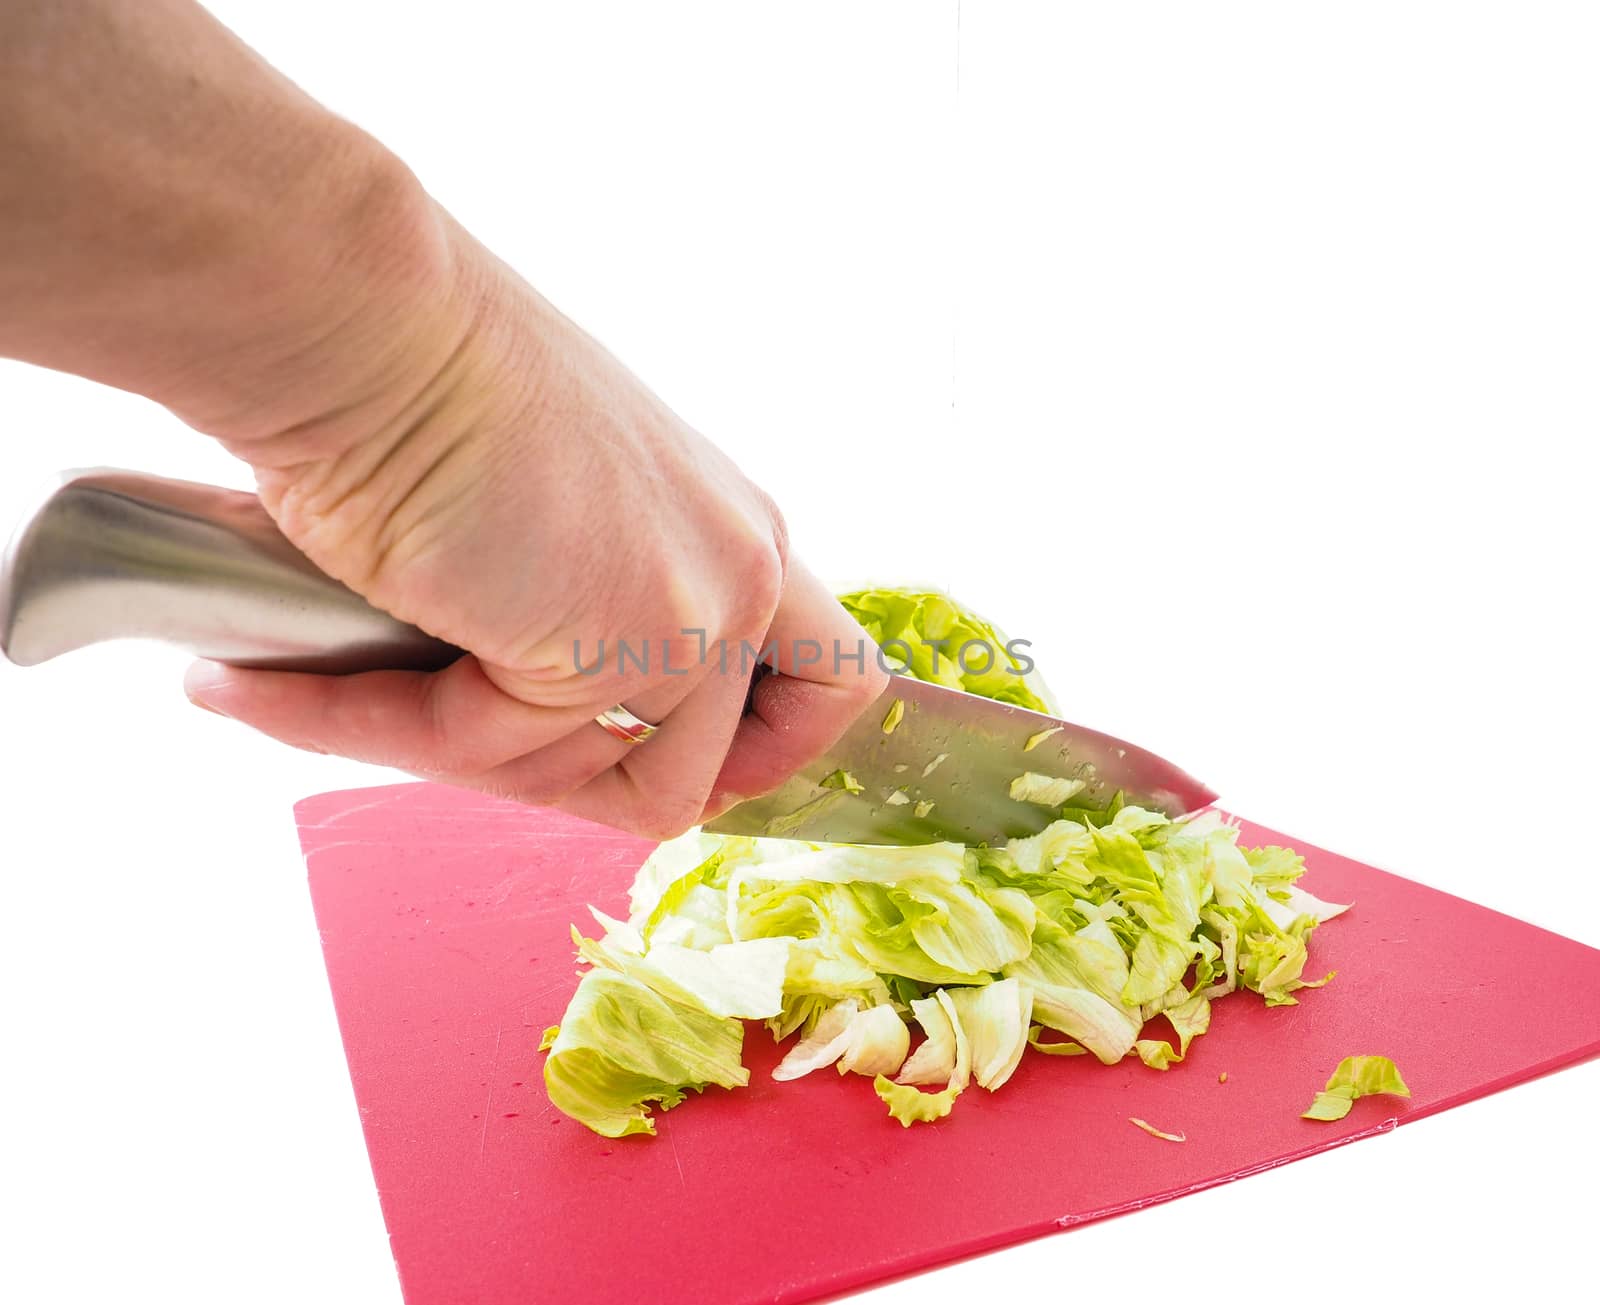 Hand cutting fresh green lettuce salad with grey metal knife on red plastic cutting board towards white